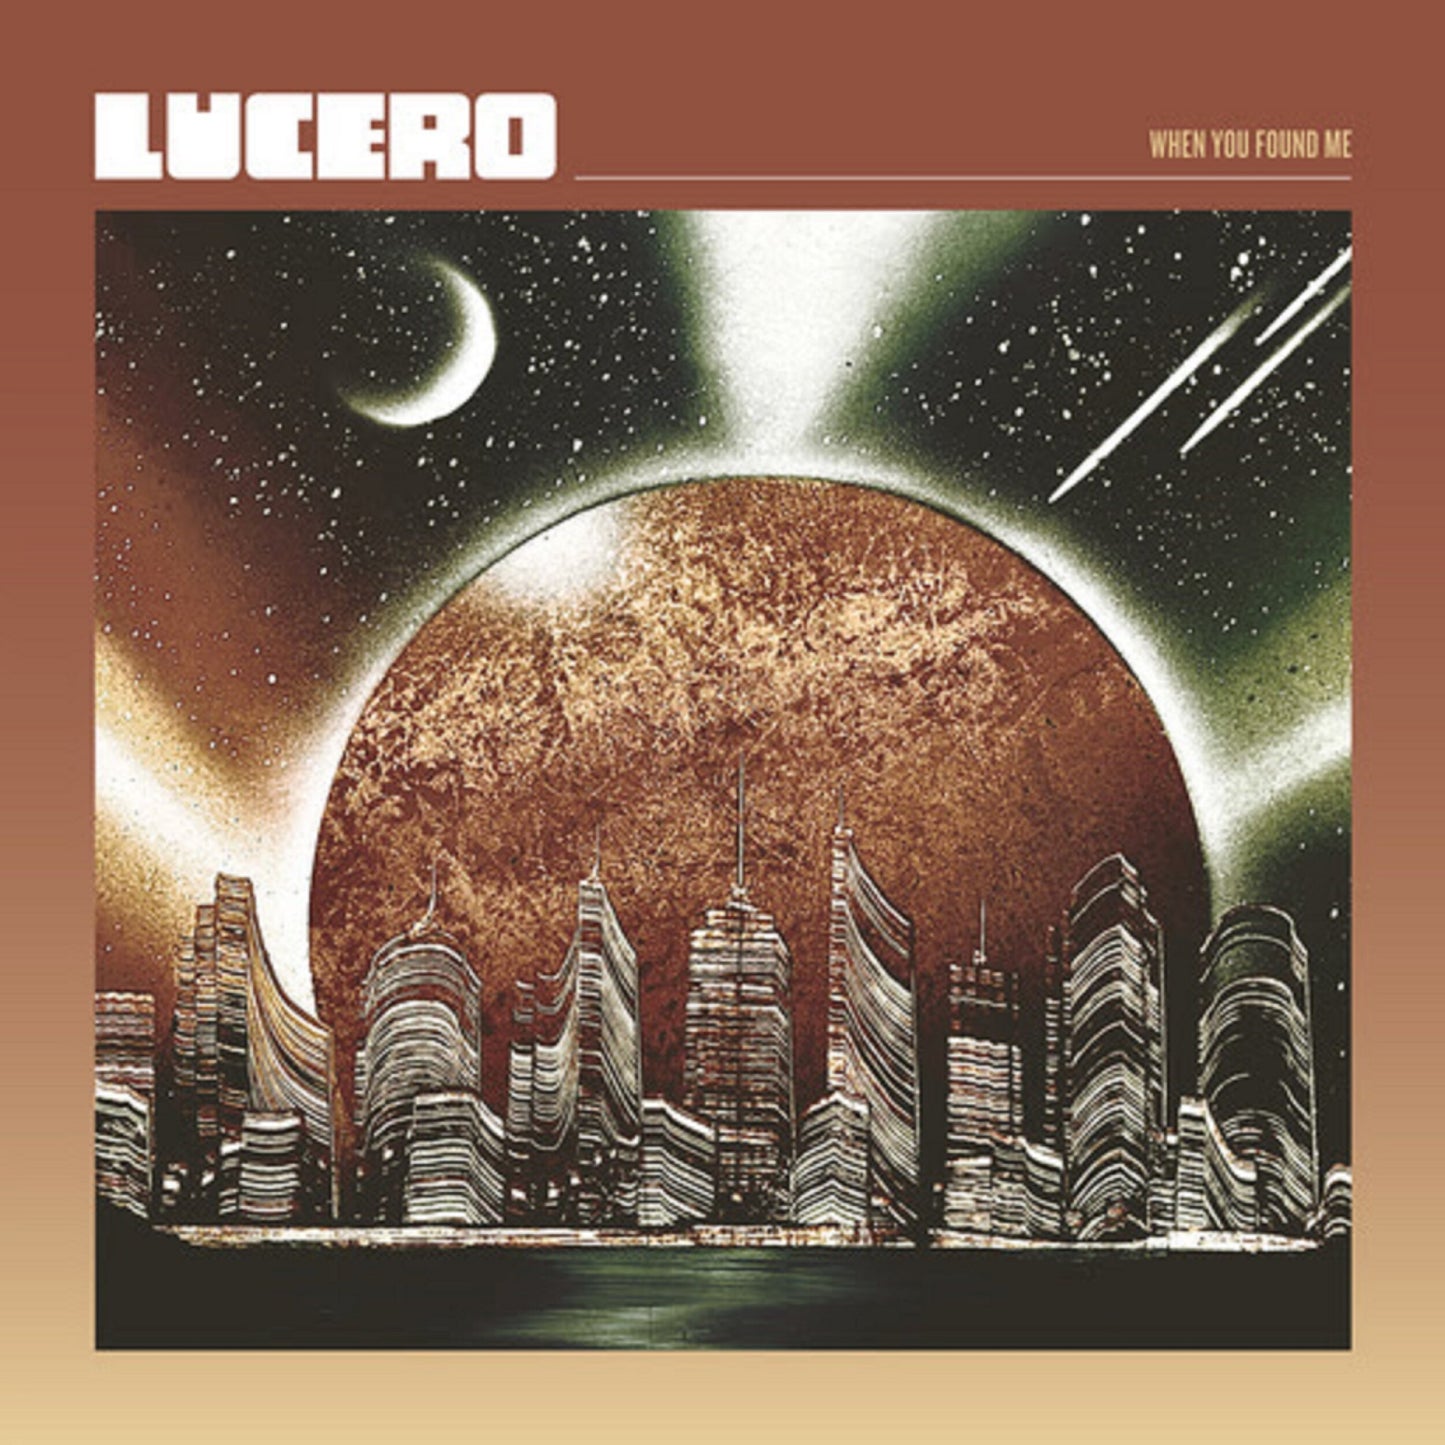 Lucero "When You Found Me" LP (Clear)